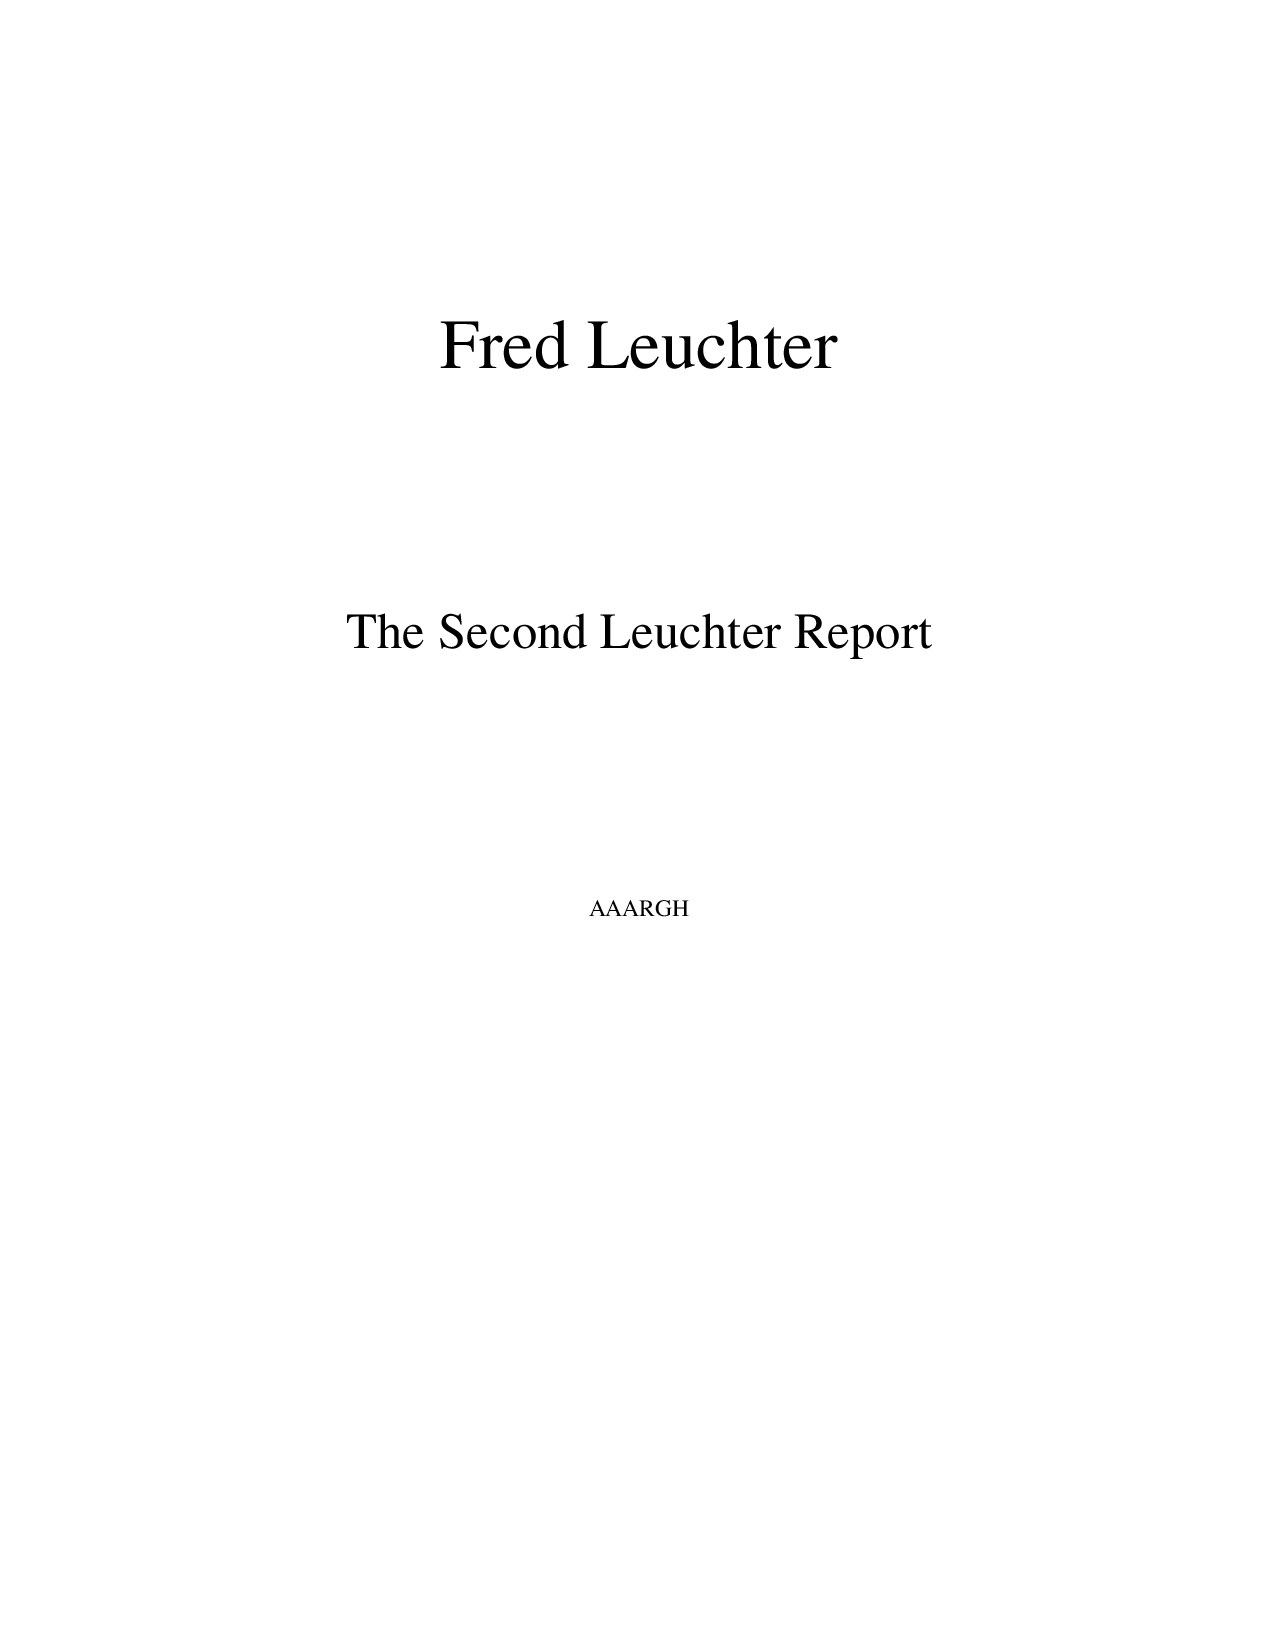 The Second Leuchter Report